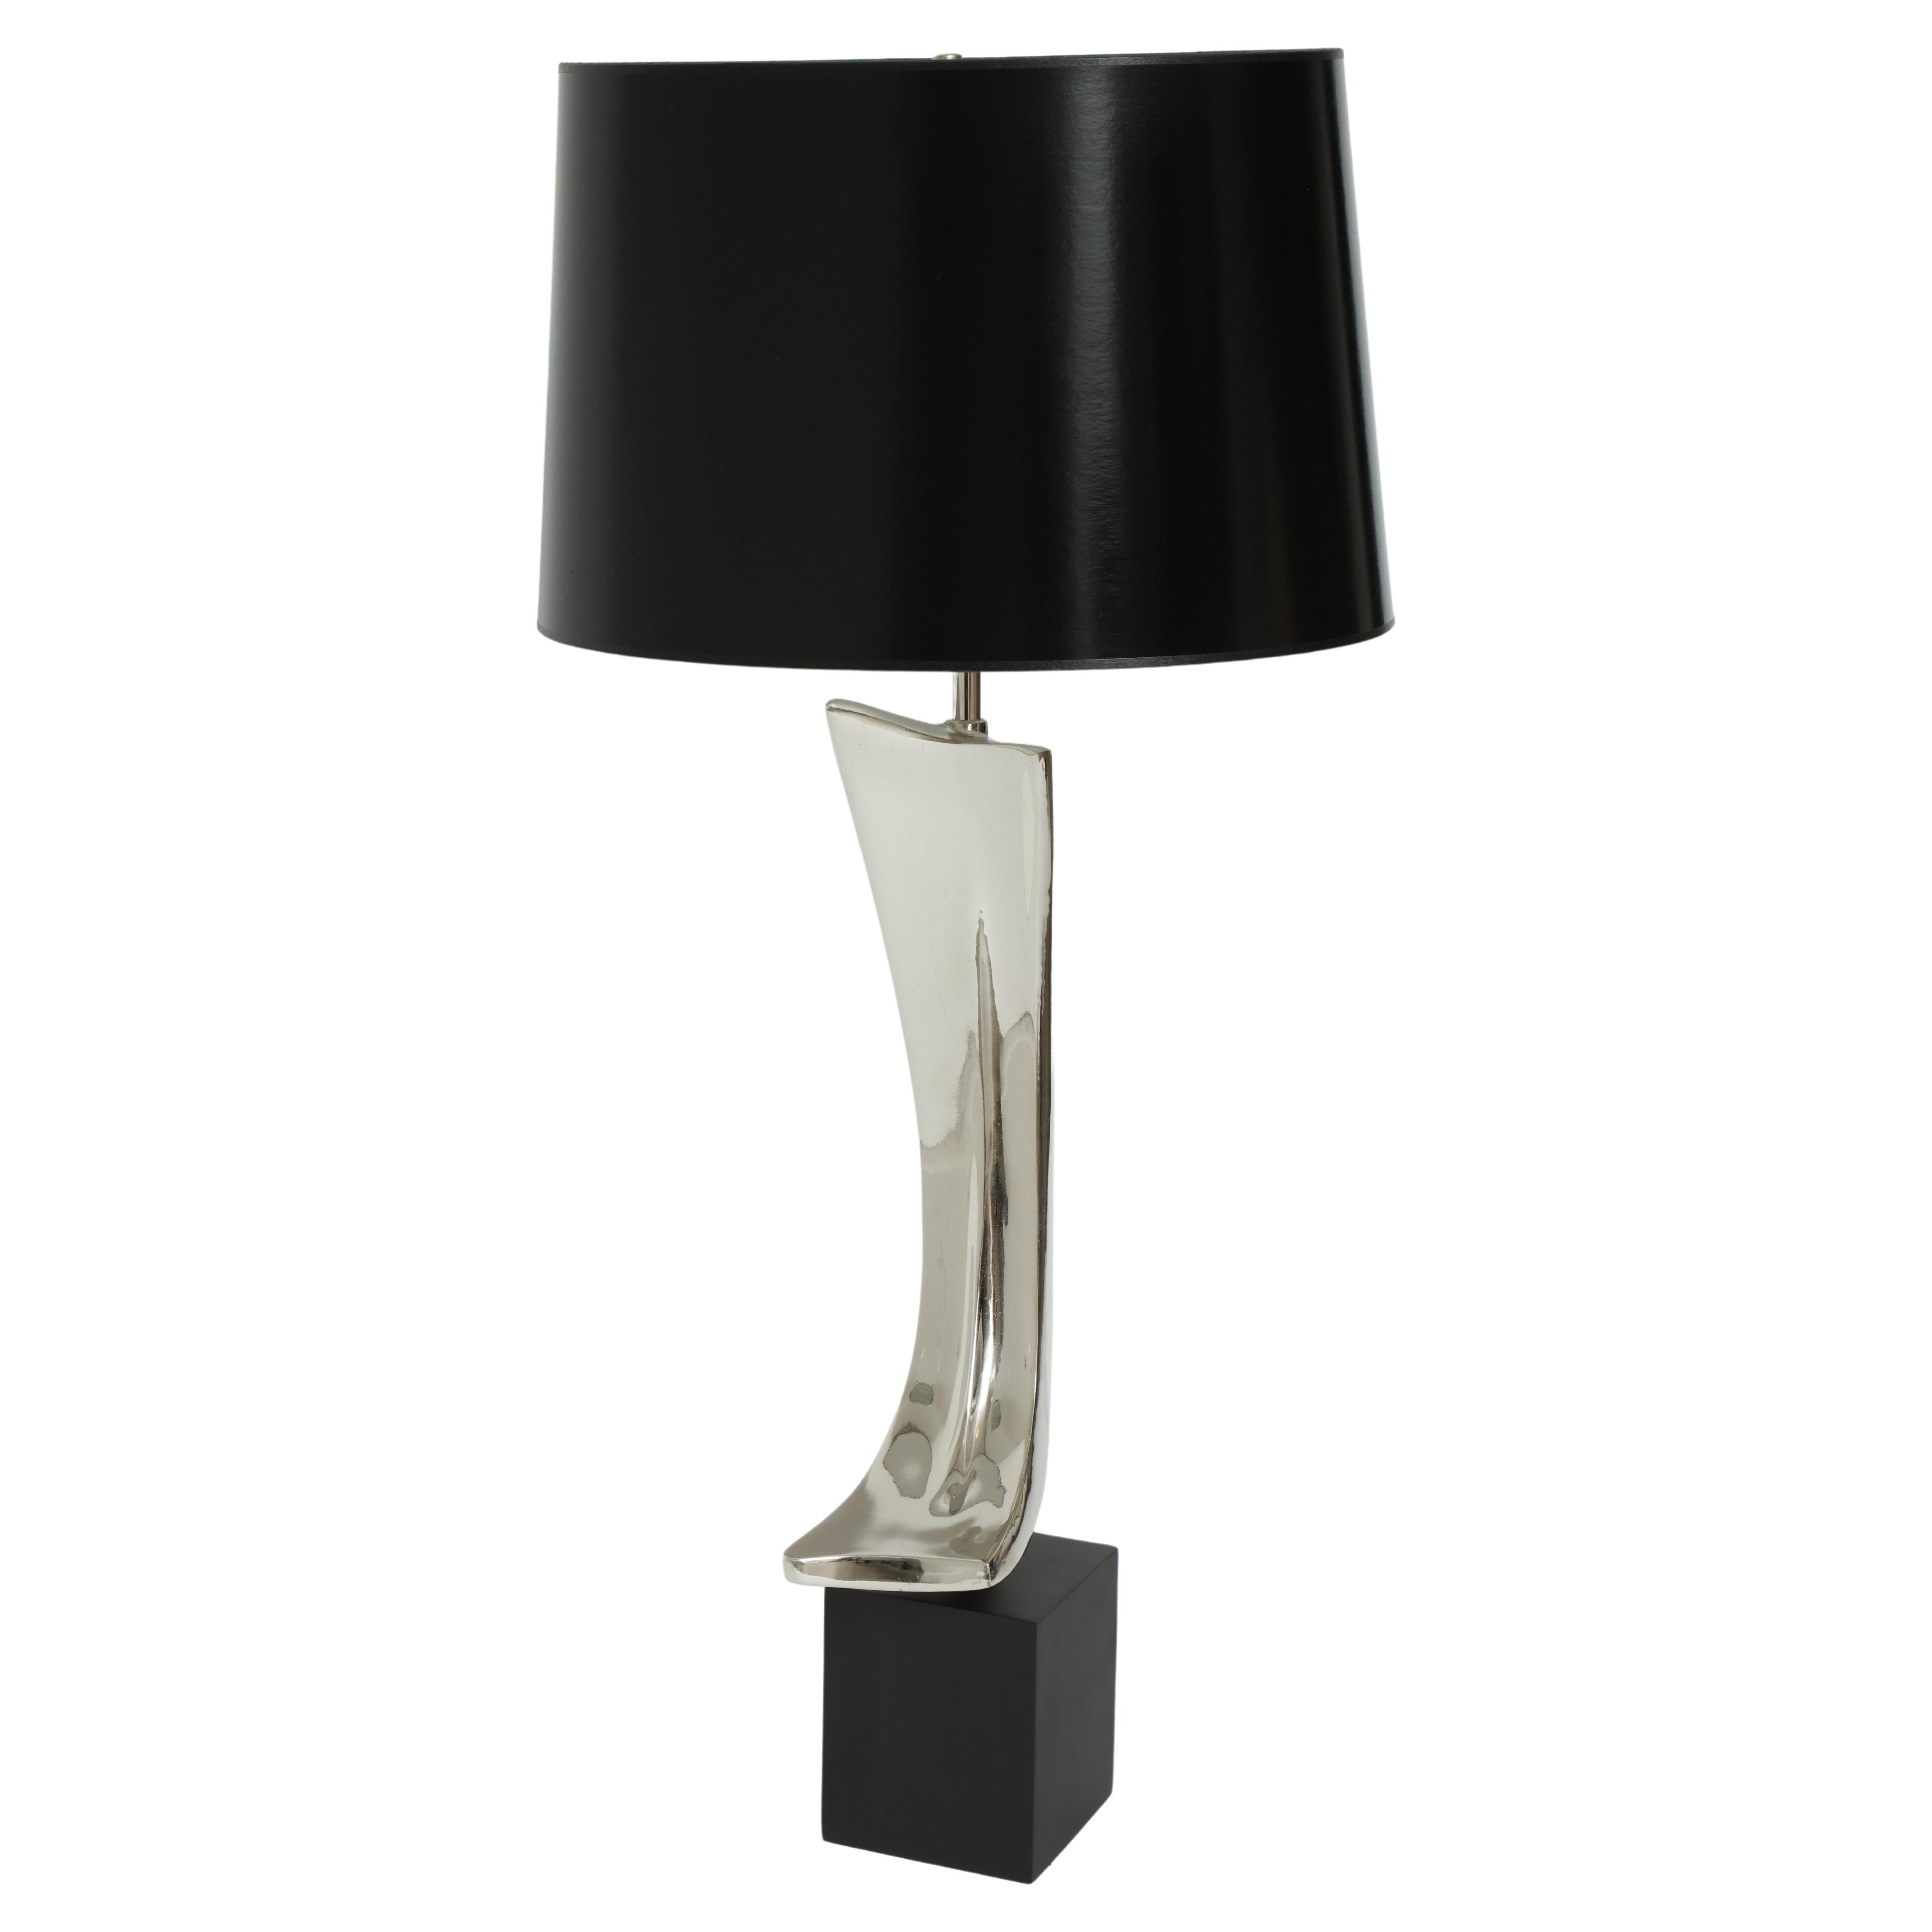 Lamp by Maurizio Tempestini, C 1950, Chrome, Single Lamp, No Lamp Shade Included For Sale